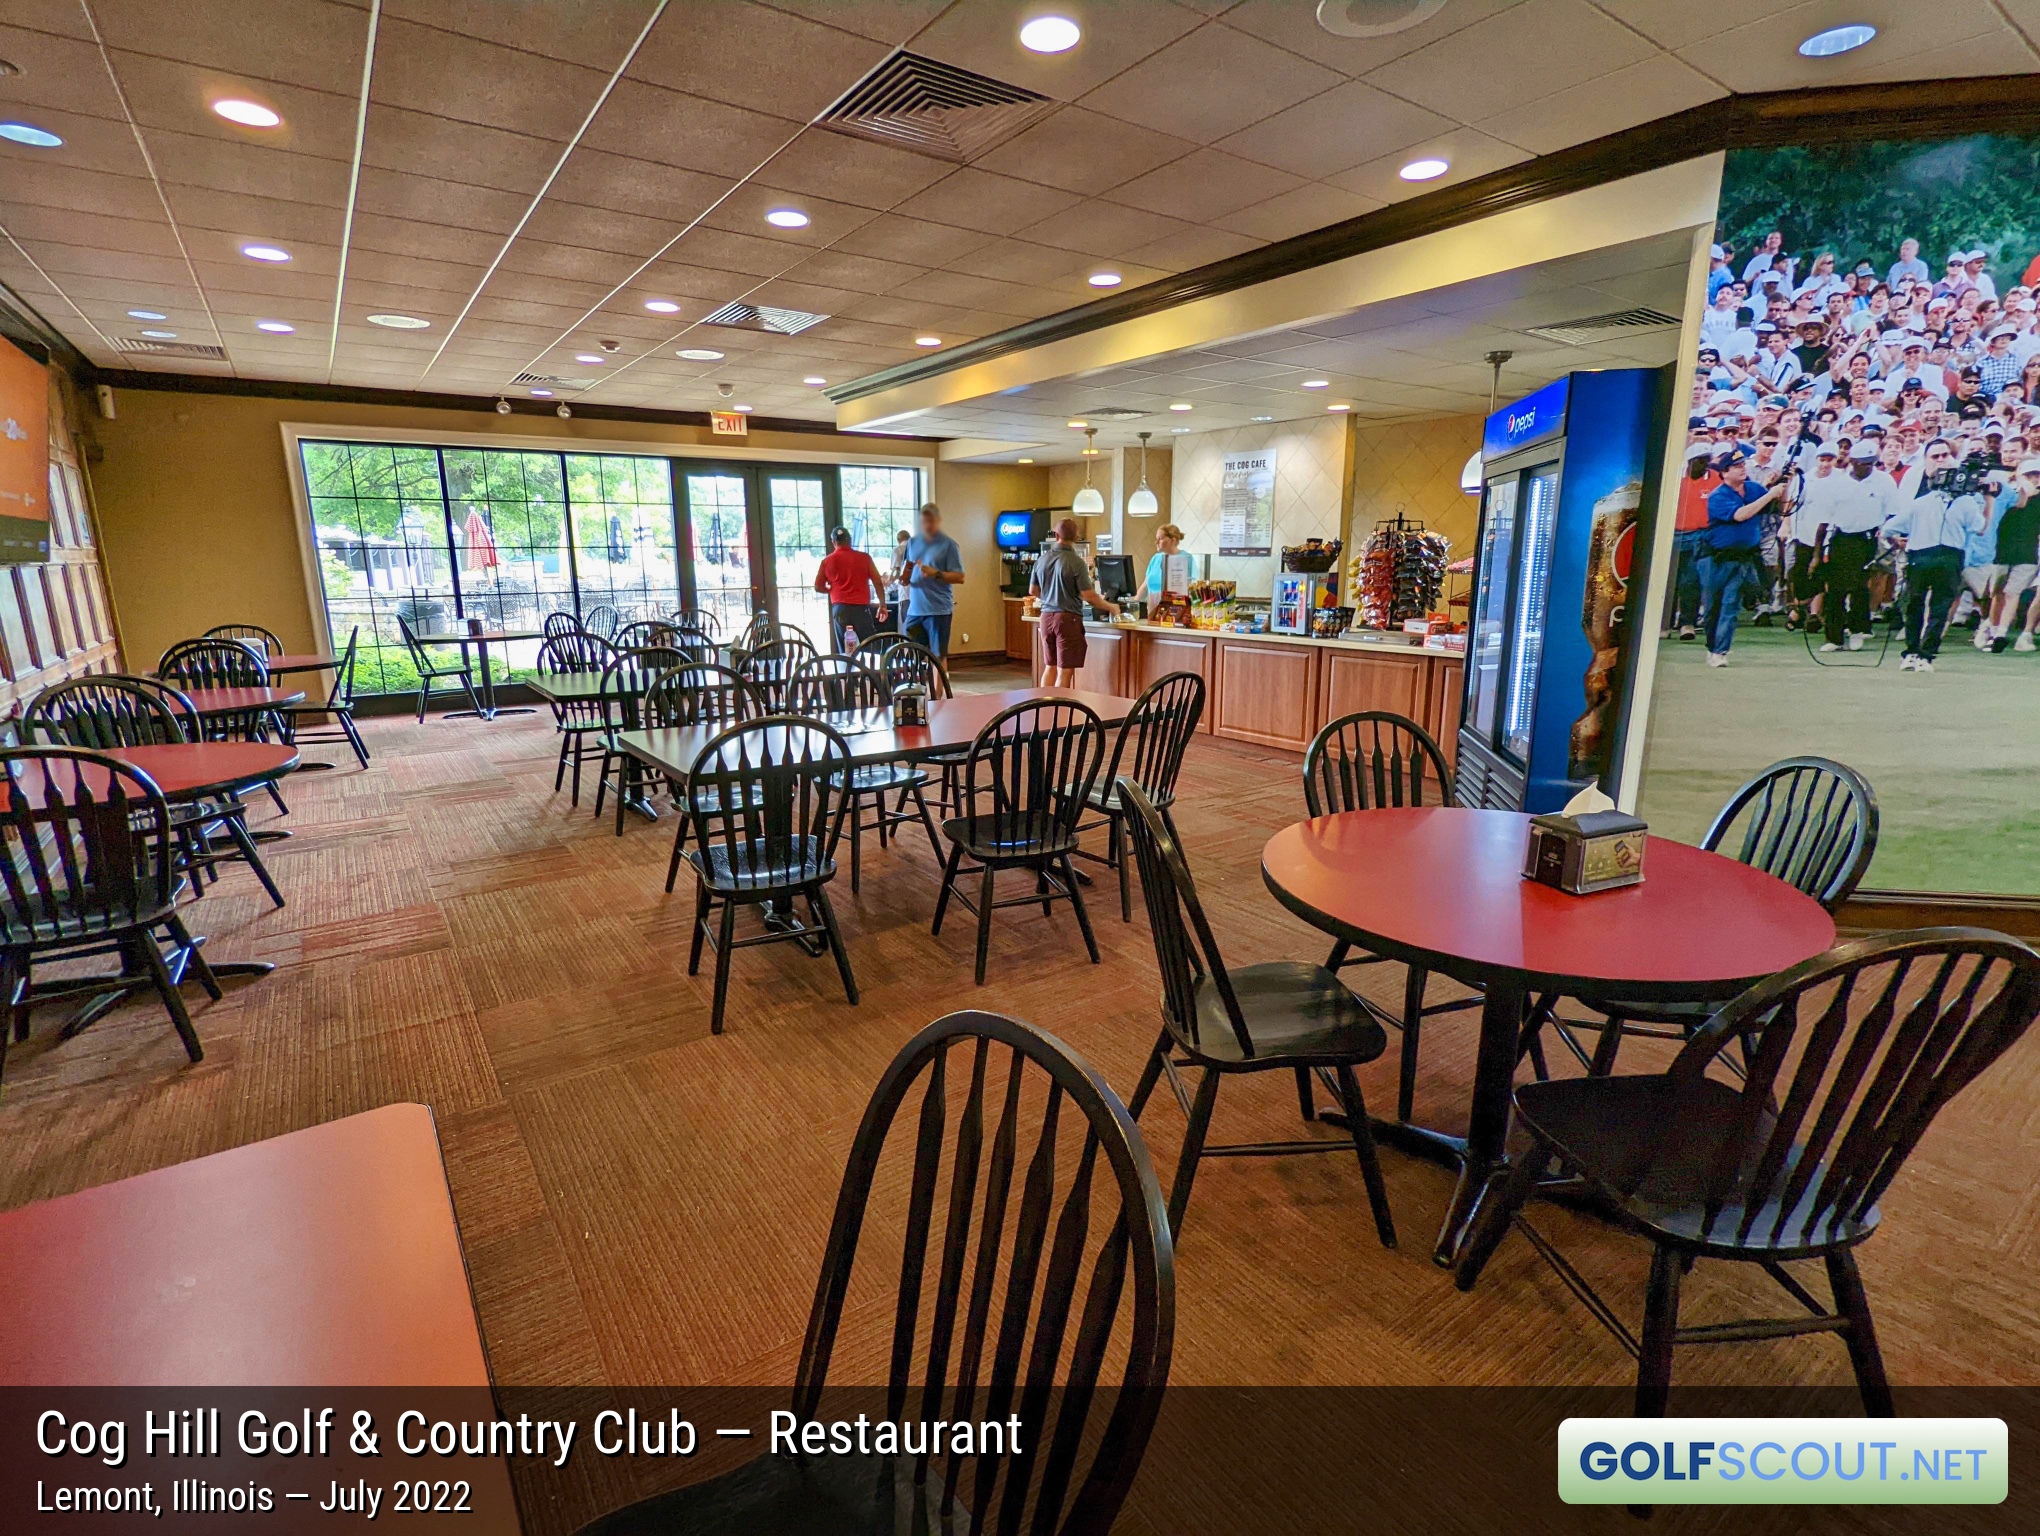 Photo of the restaurant at Cog Hill Course #2 - Ravines in Lemont, Illinois. The restaurant in the clubhouse for courses 2 and 4. Much more utilitarian and straightforward than in the main clubhouse across the street. 